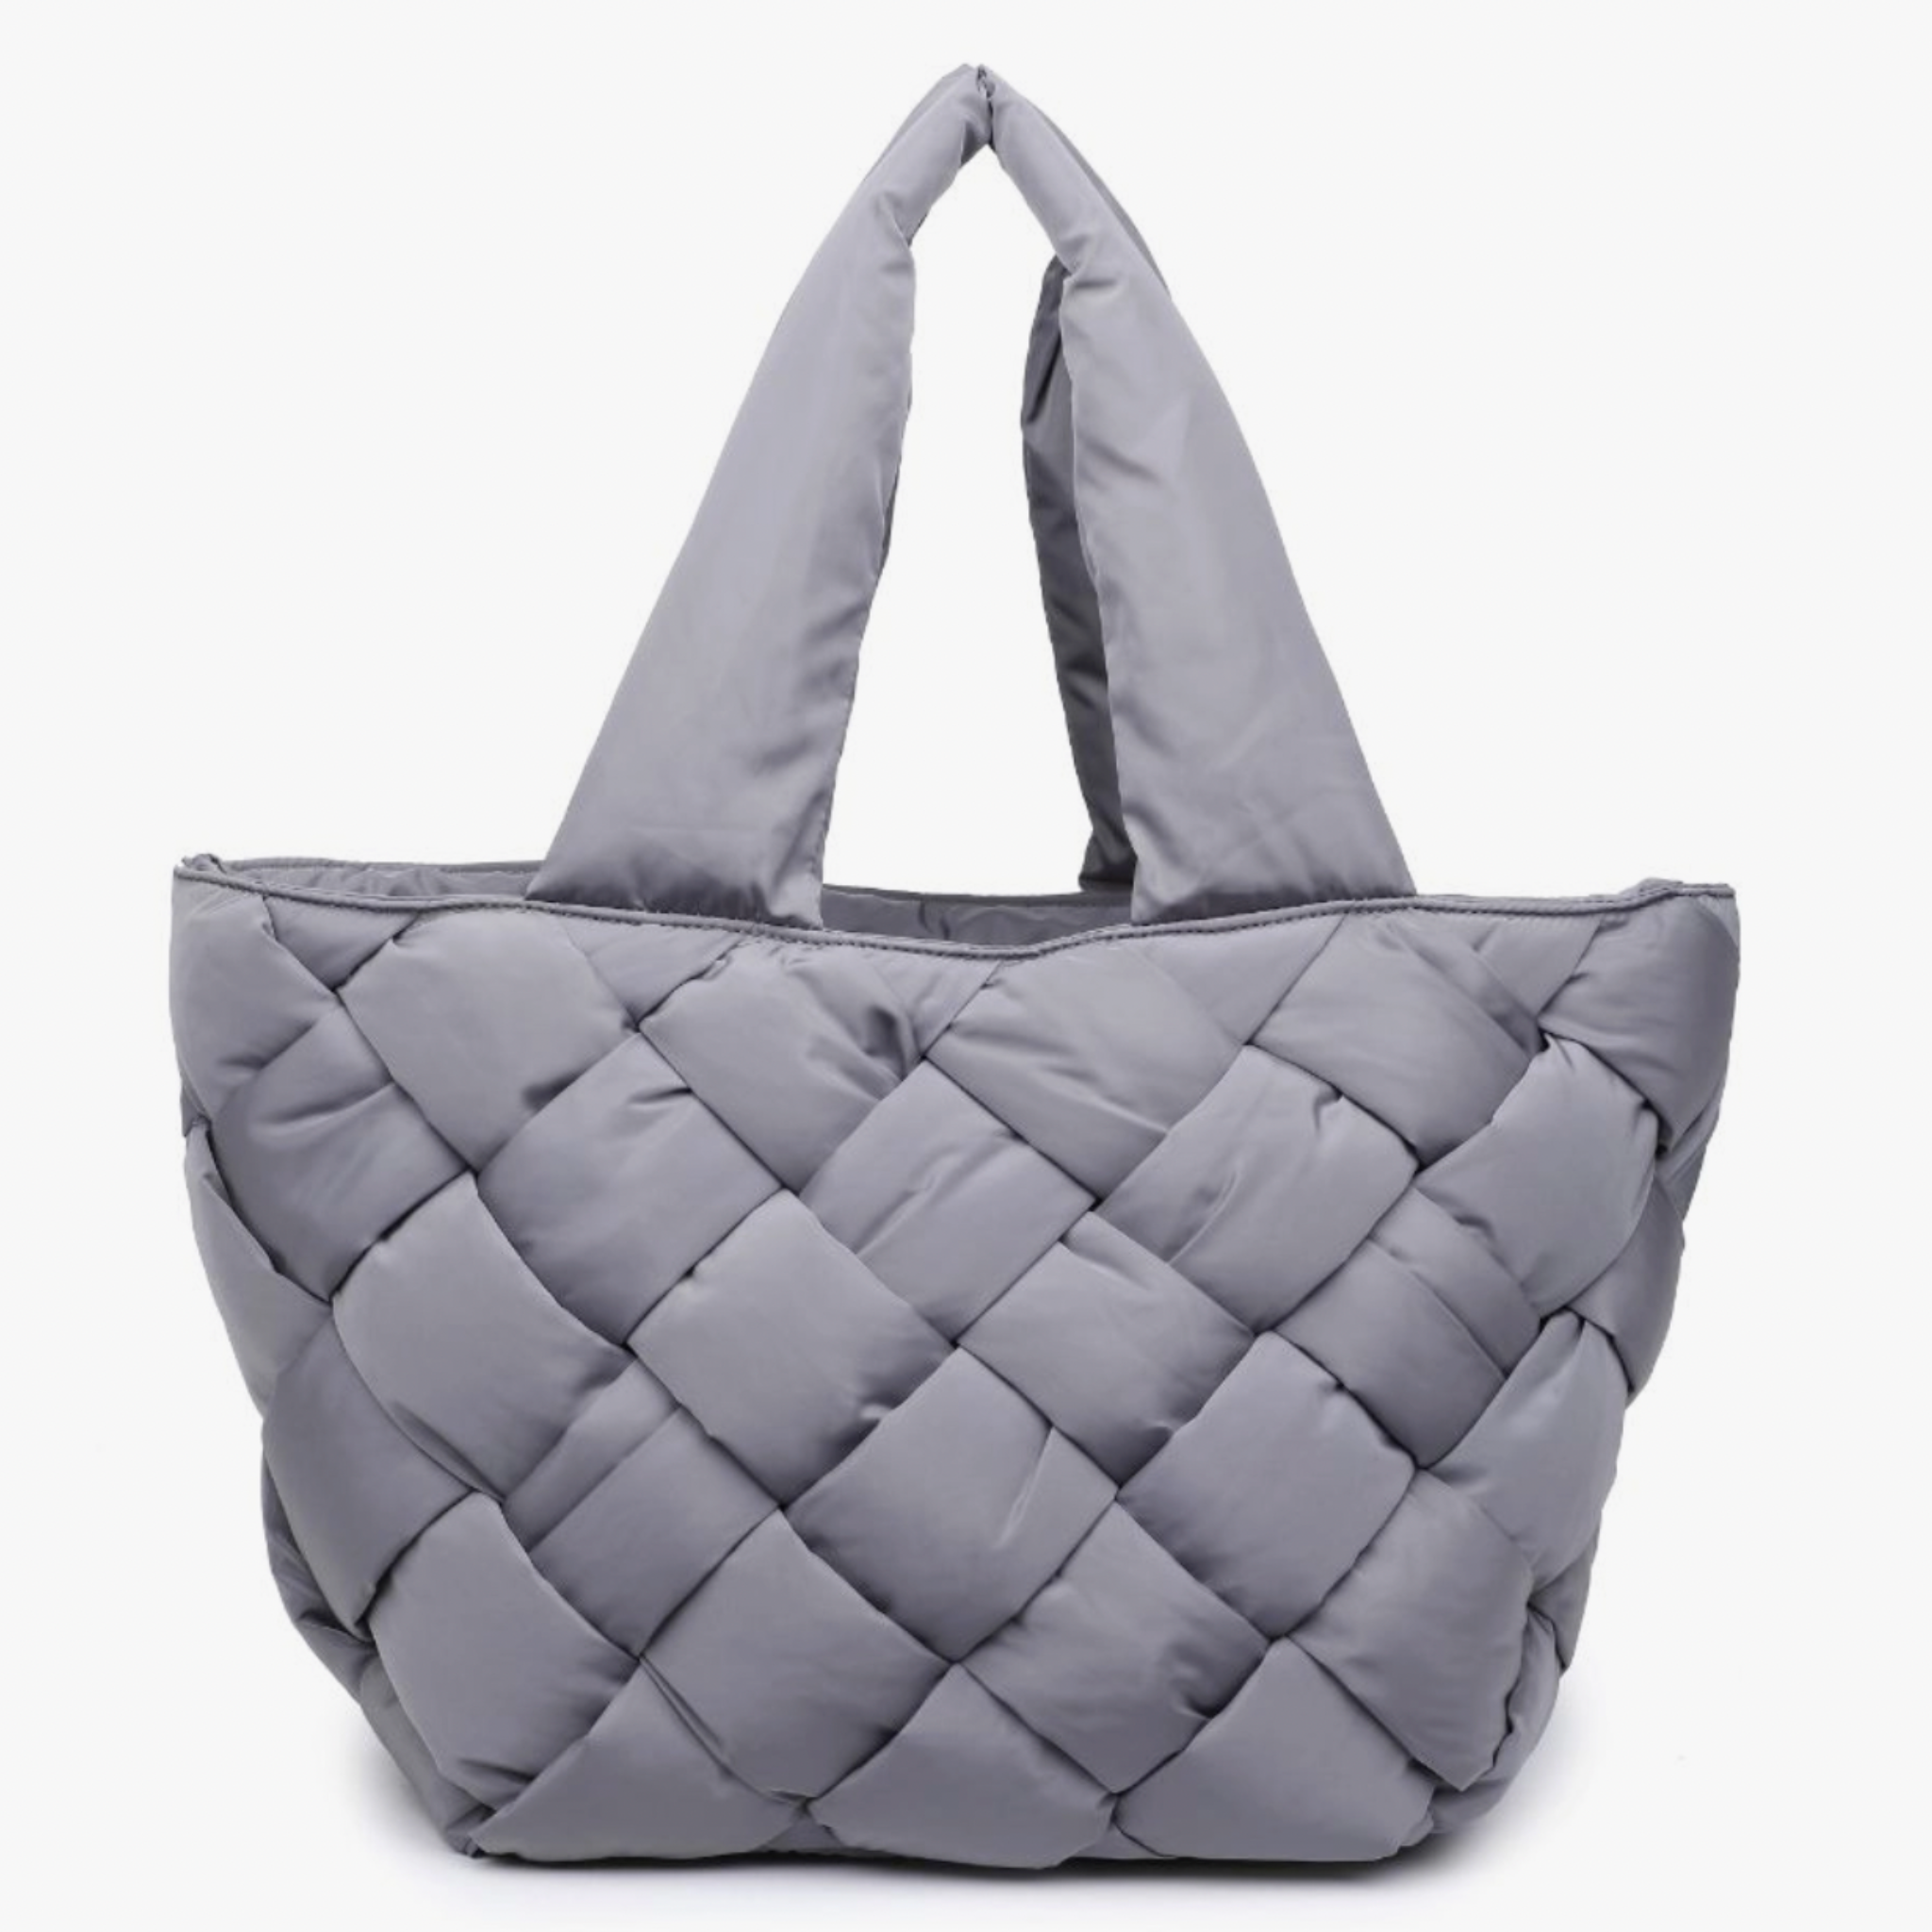 Intuition East West tote